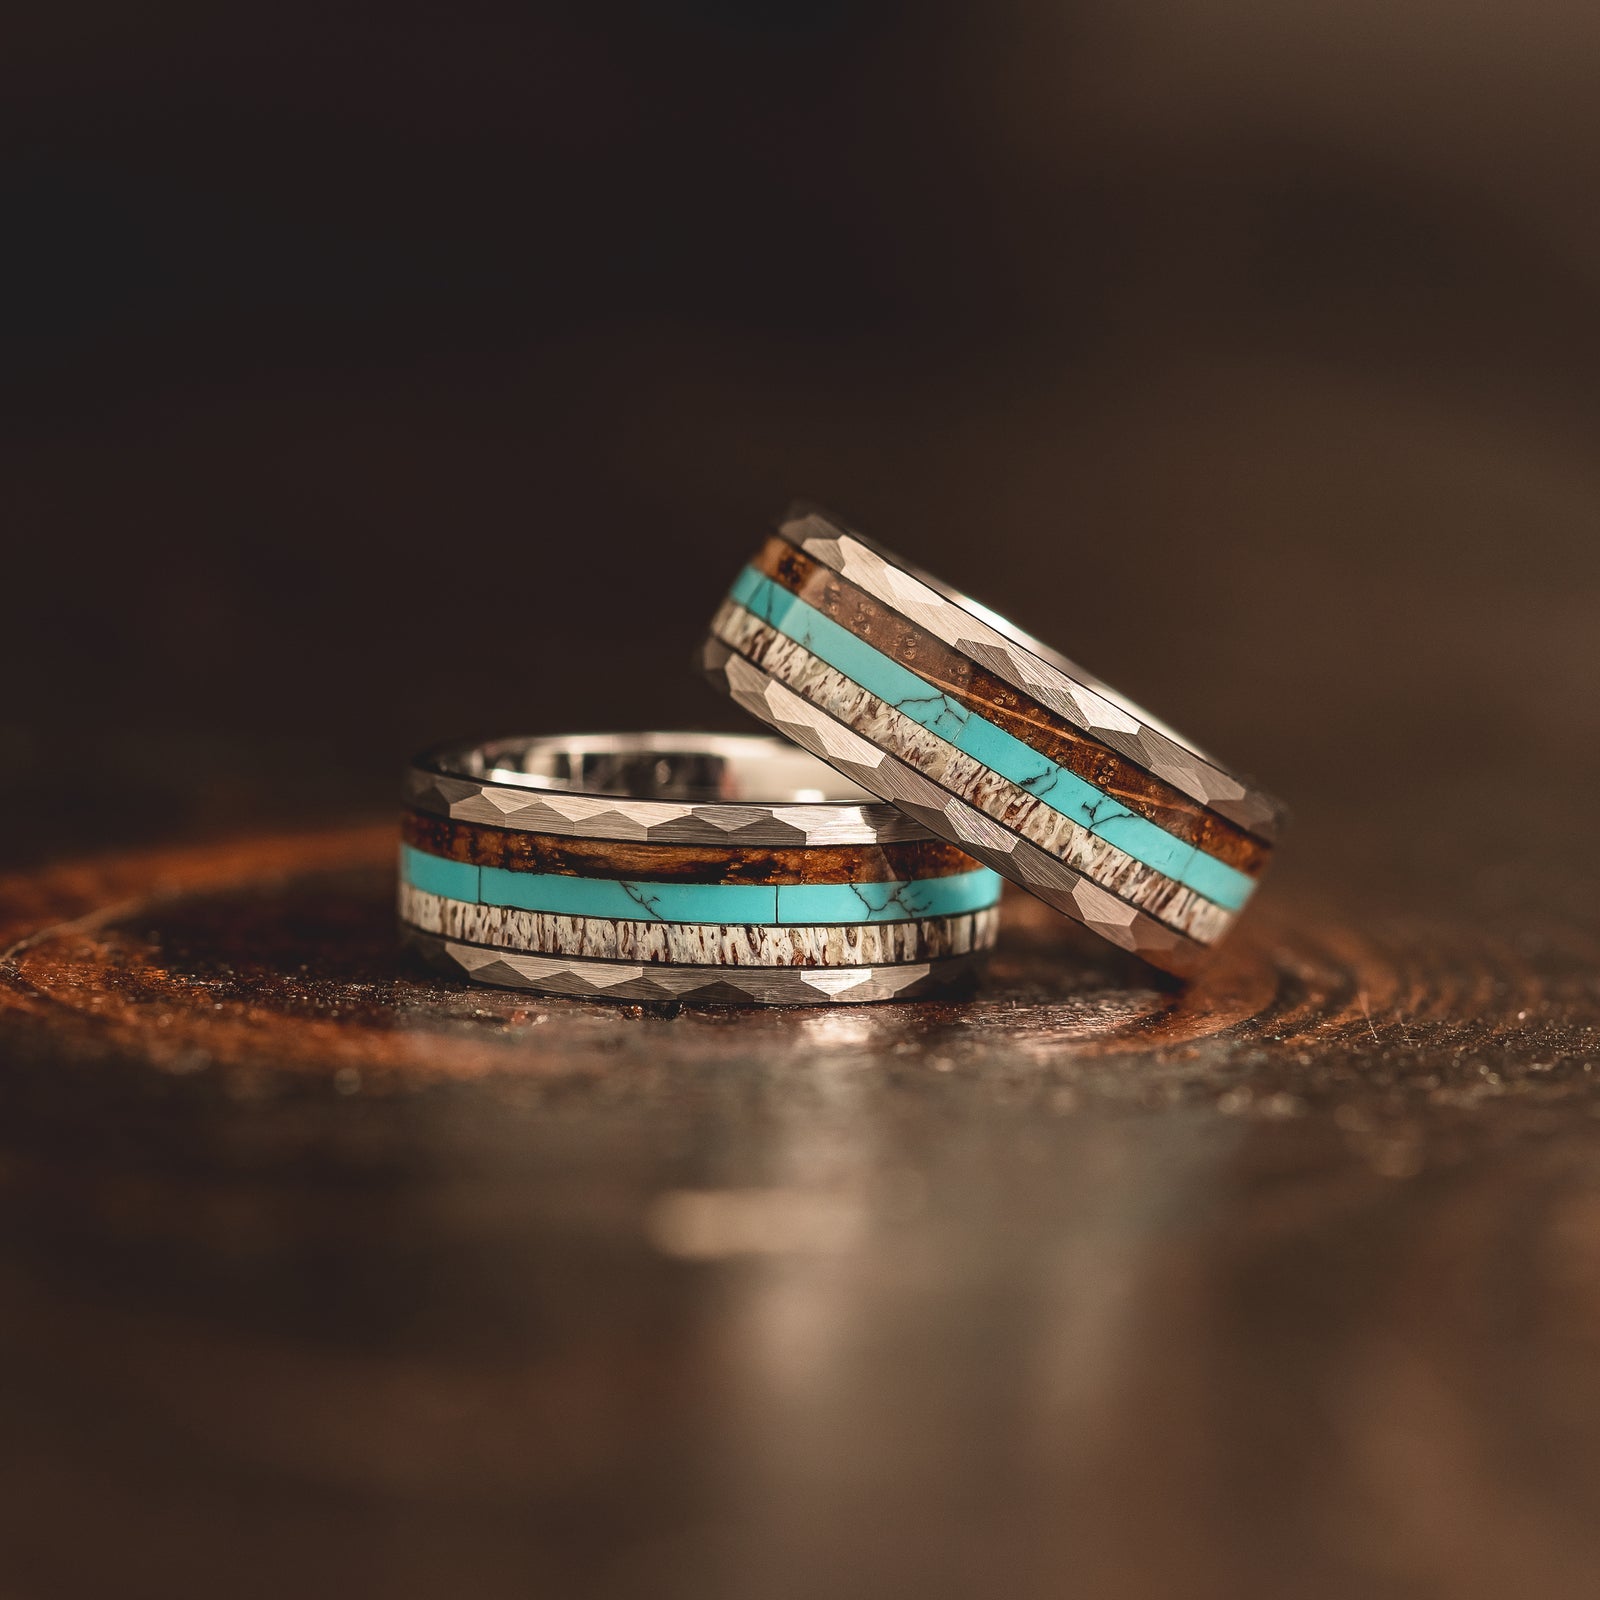 Couples Deer Antler Green Fishing Line Wedding Rings His and Hers Silver Wedding Bands, Rings Matching Wedding Rings Couples Ring Set